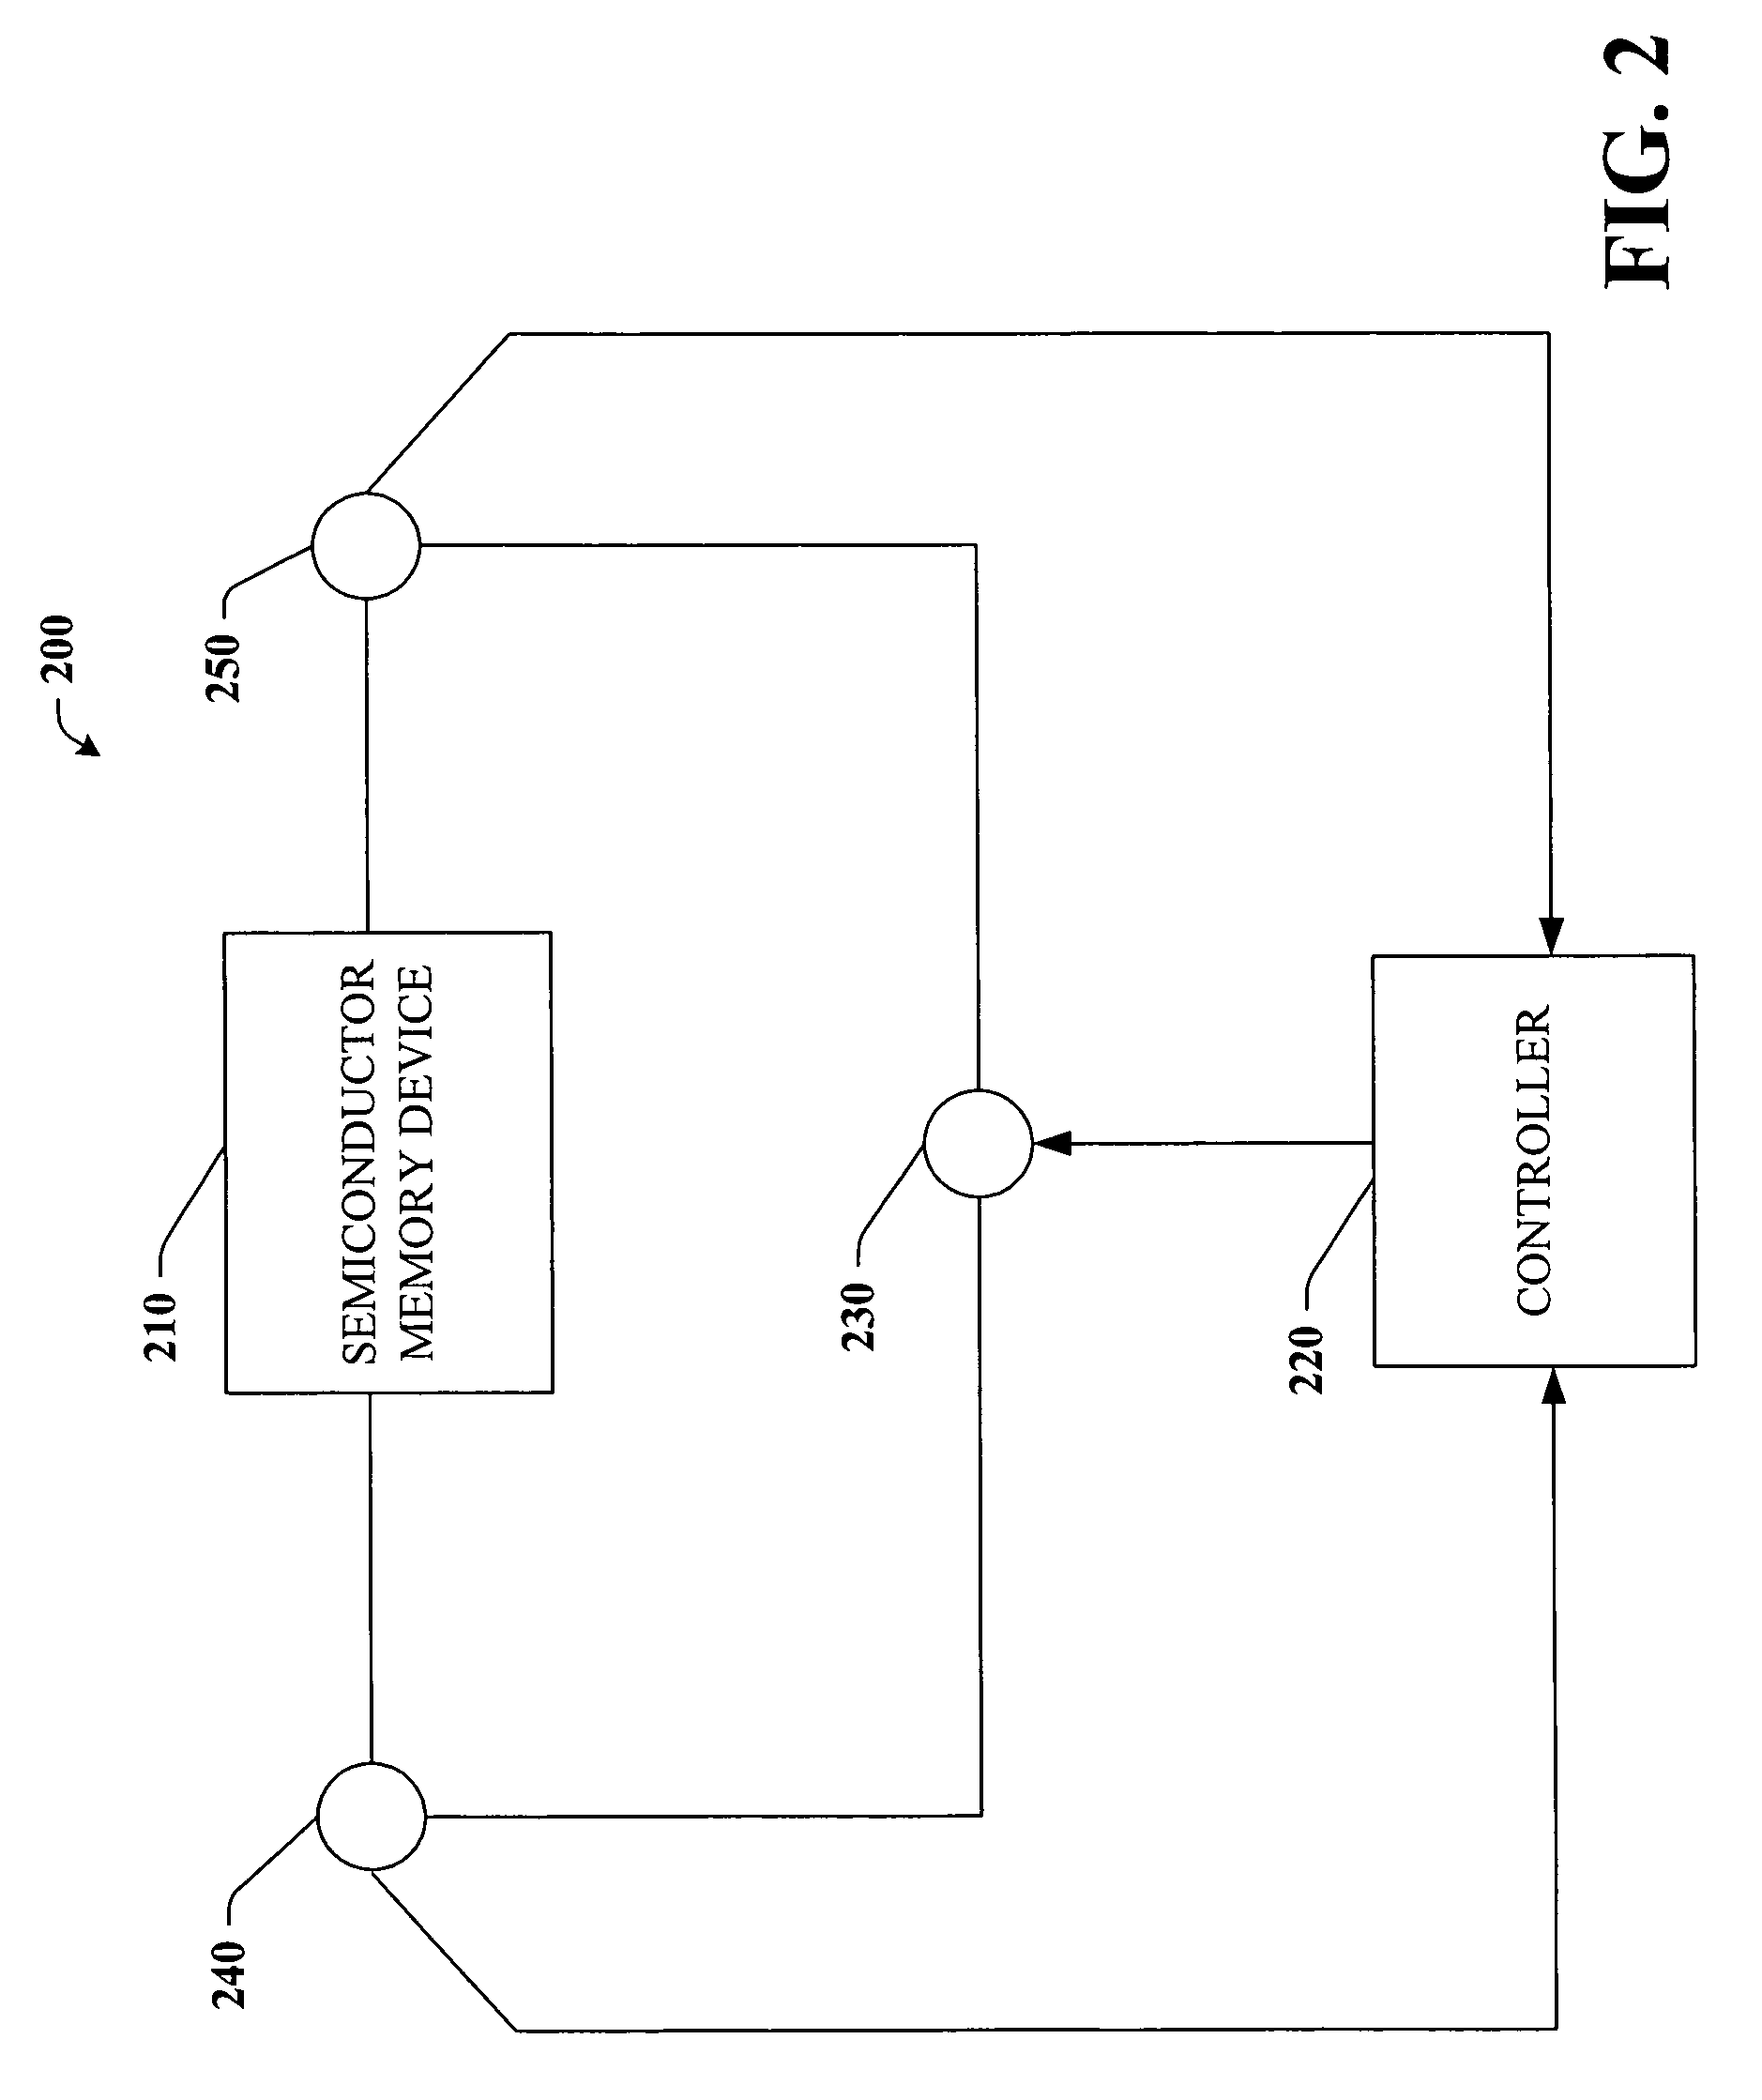 Program/erase waveshaping control to increase data retention of a memory cell